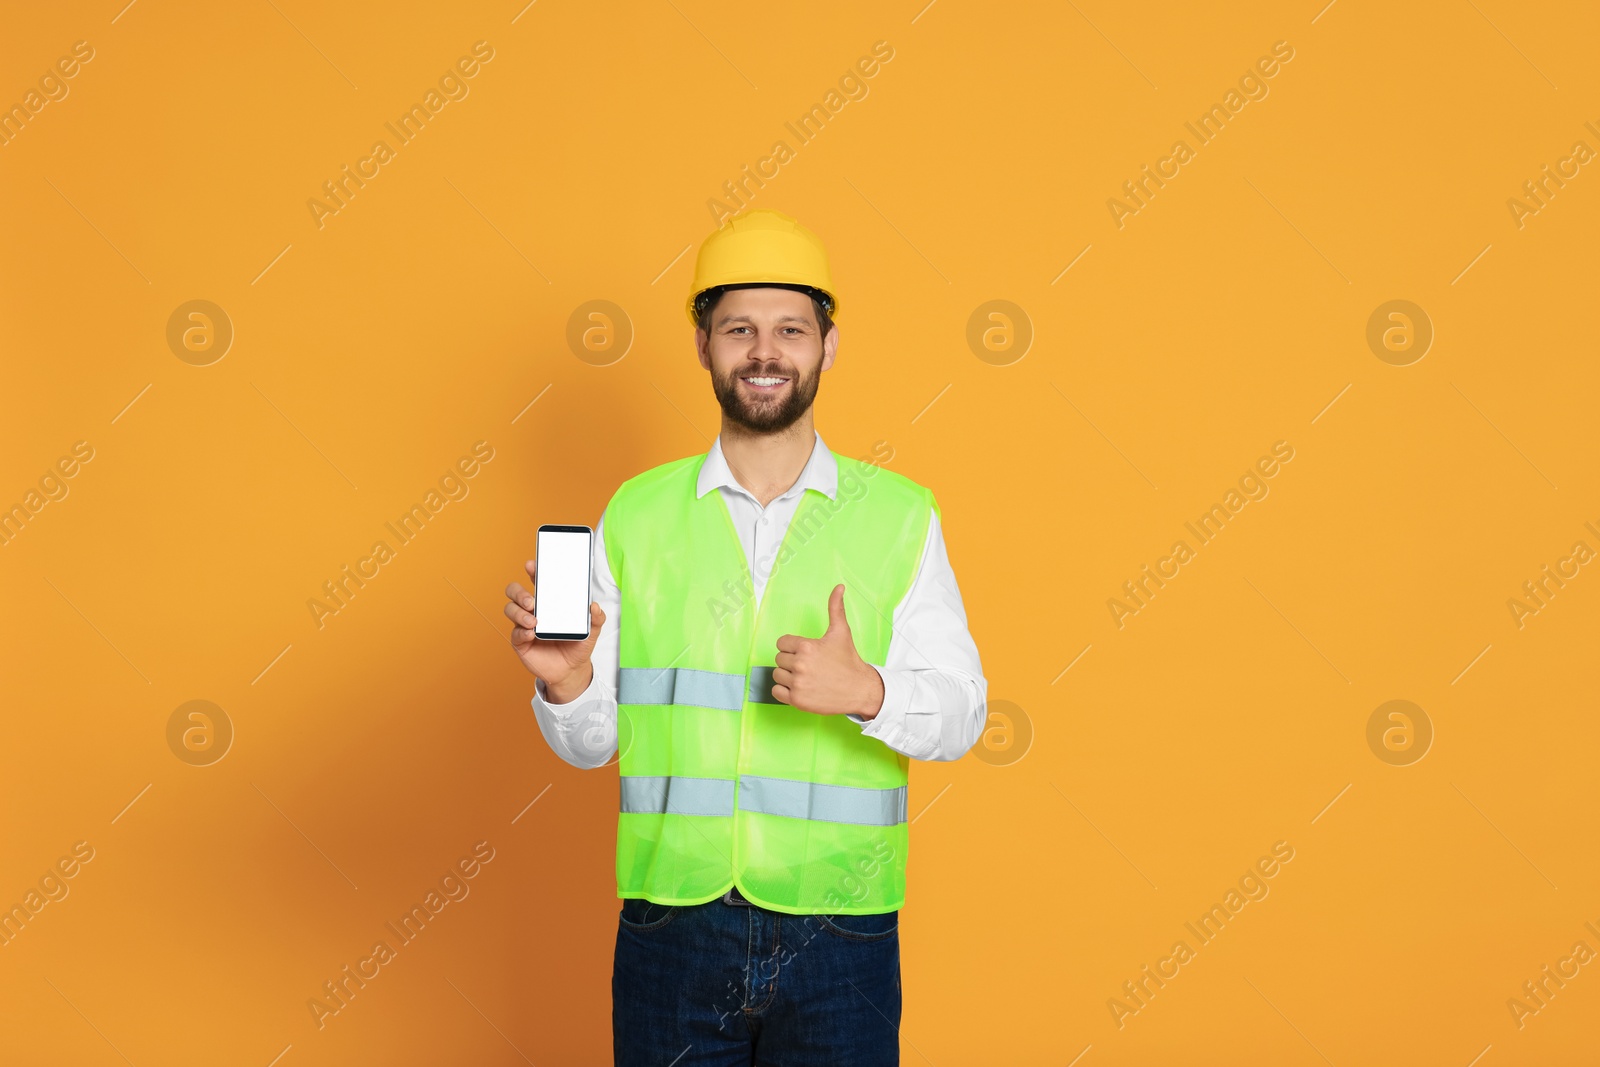 Photo of Man in reflective uniform showing smartphone and thumbs up on orange background